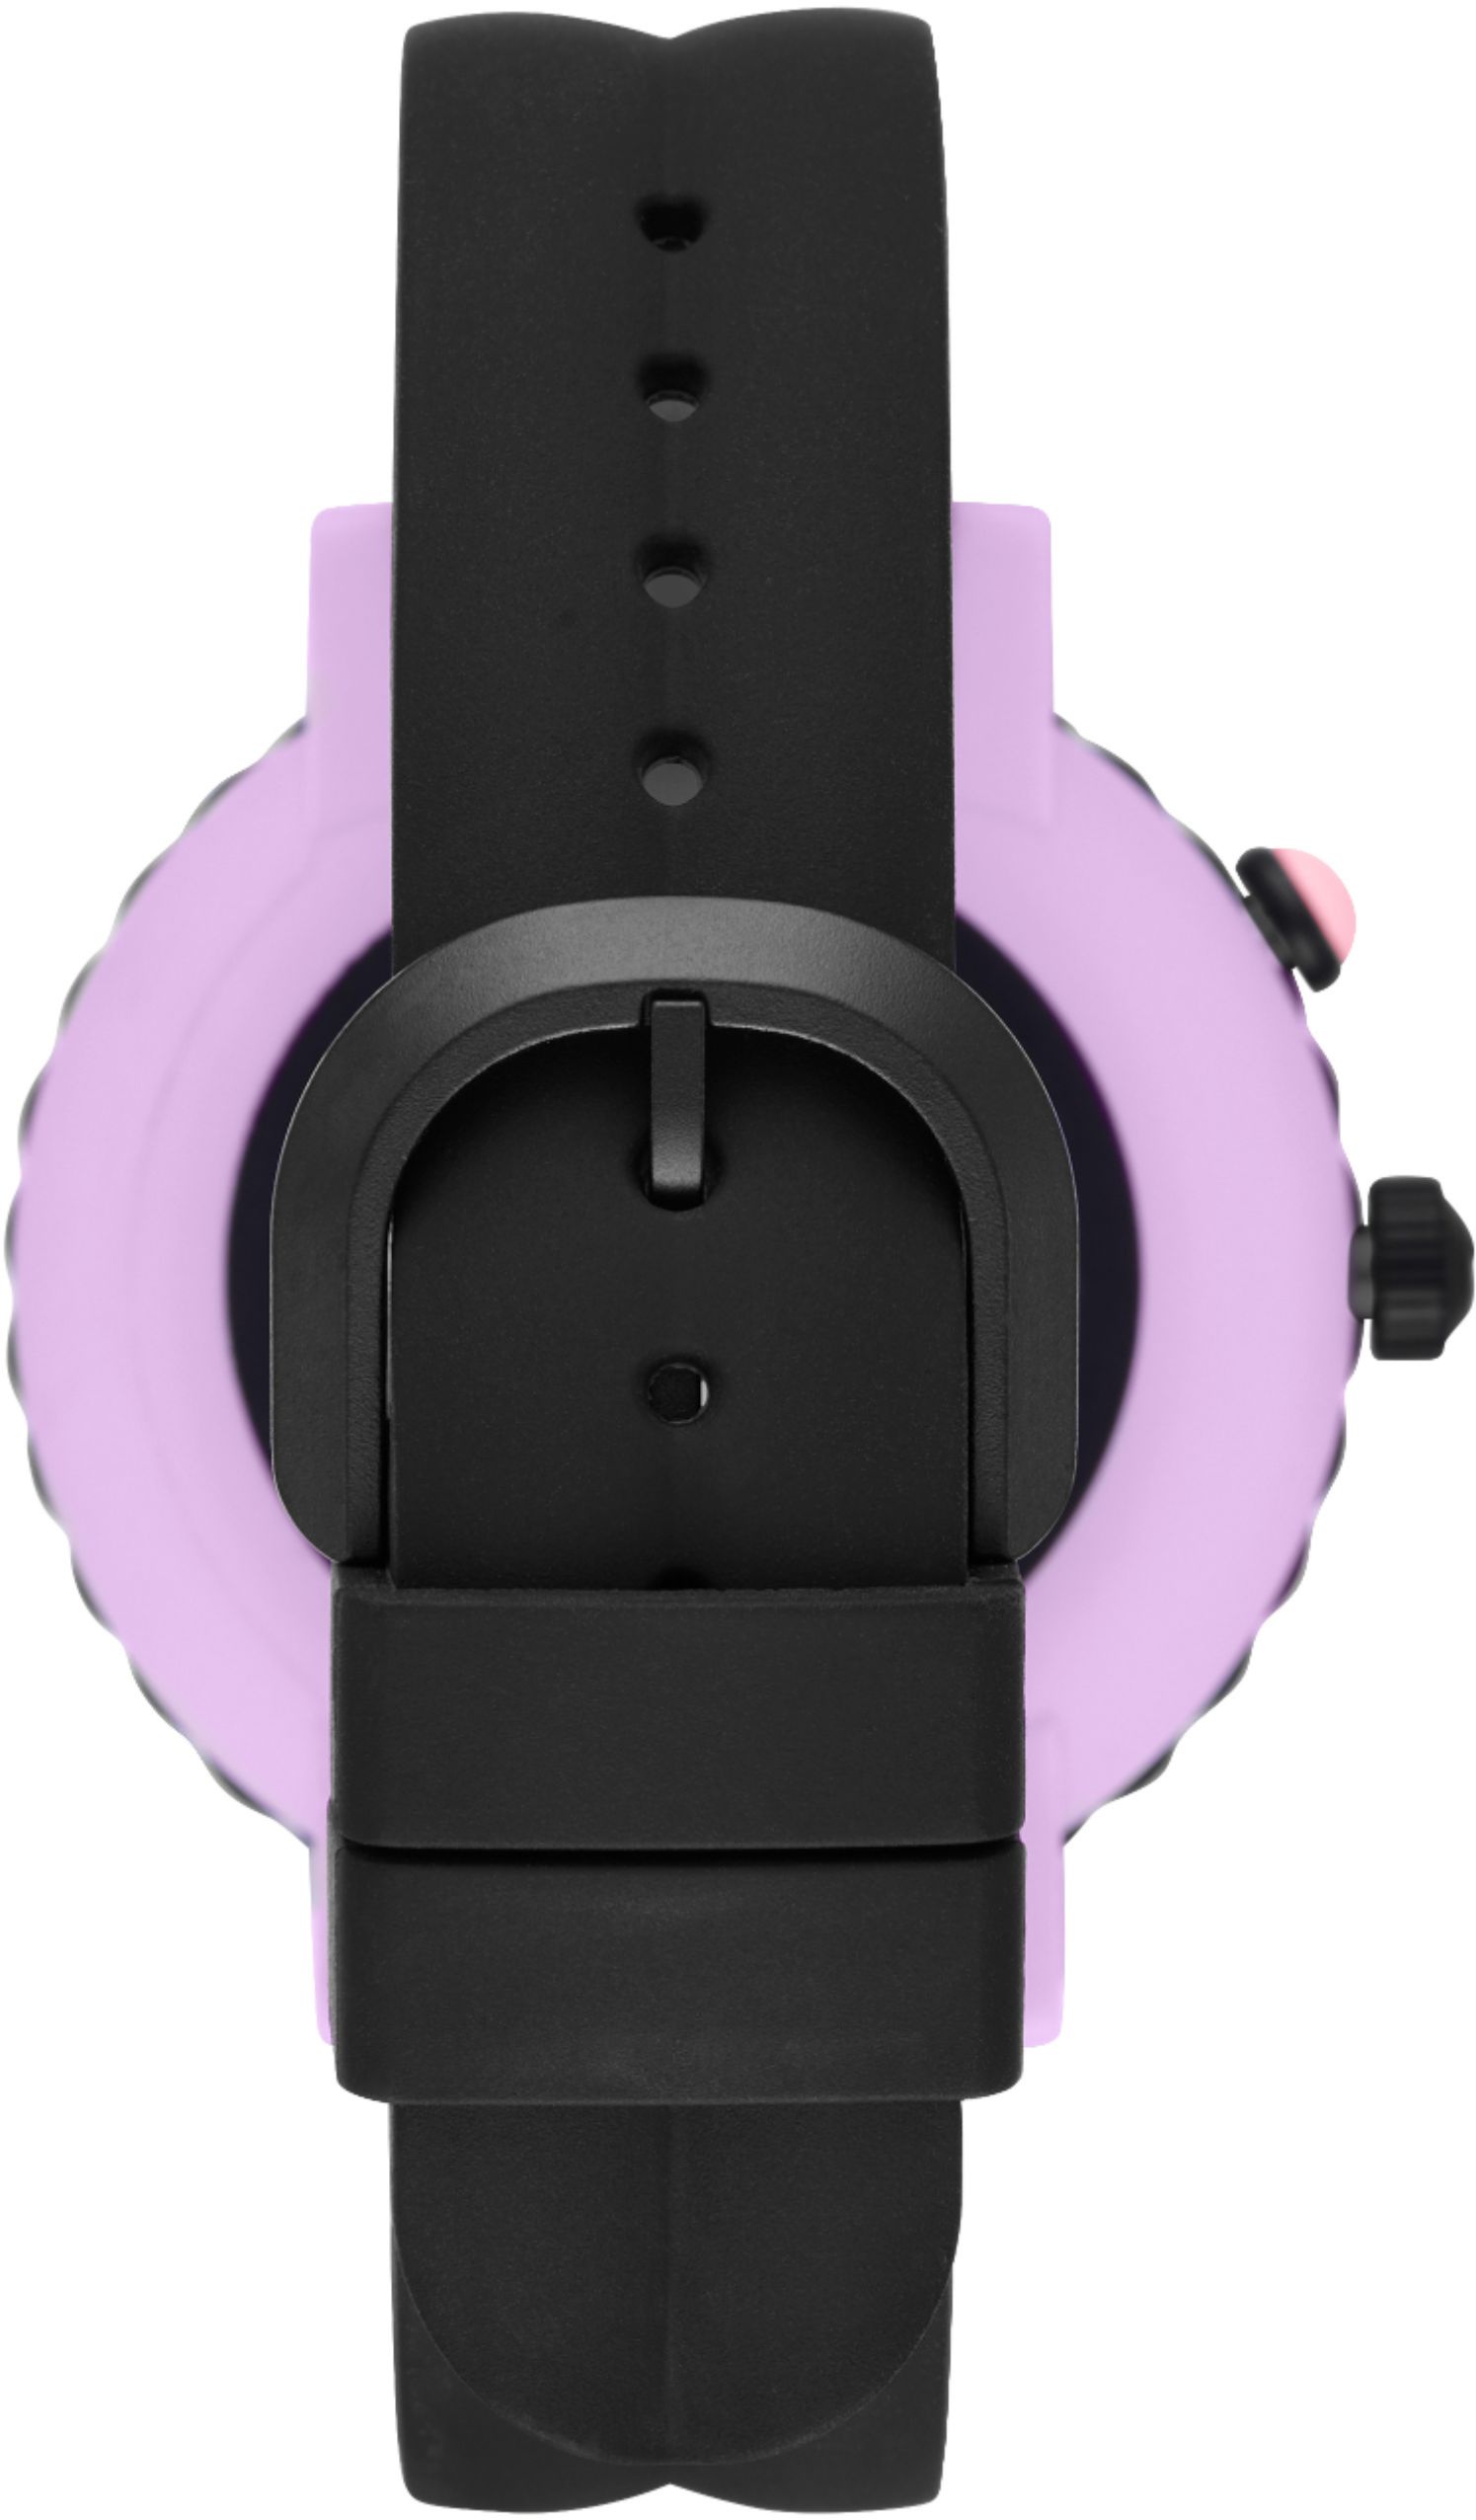 Back View: UAG - Apple Watch 42/44 - DOT - Silicone - Dusty Rose - BM